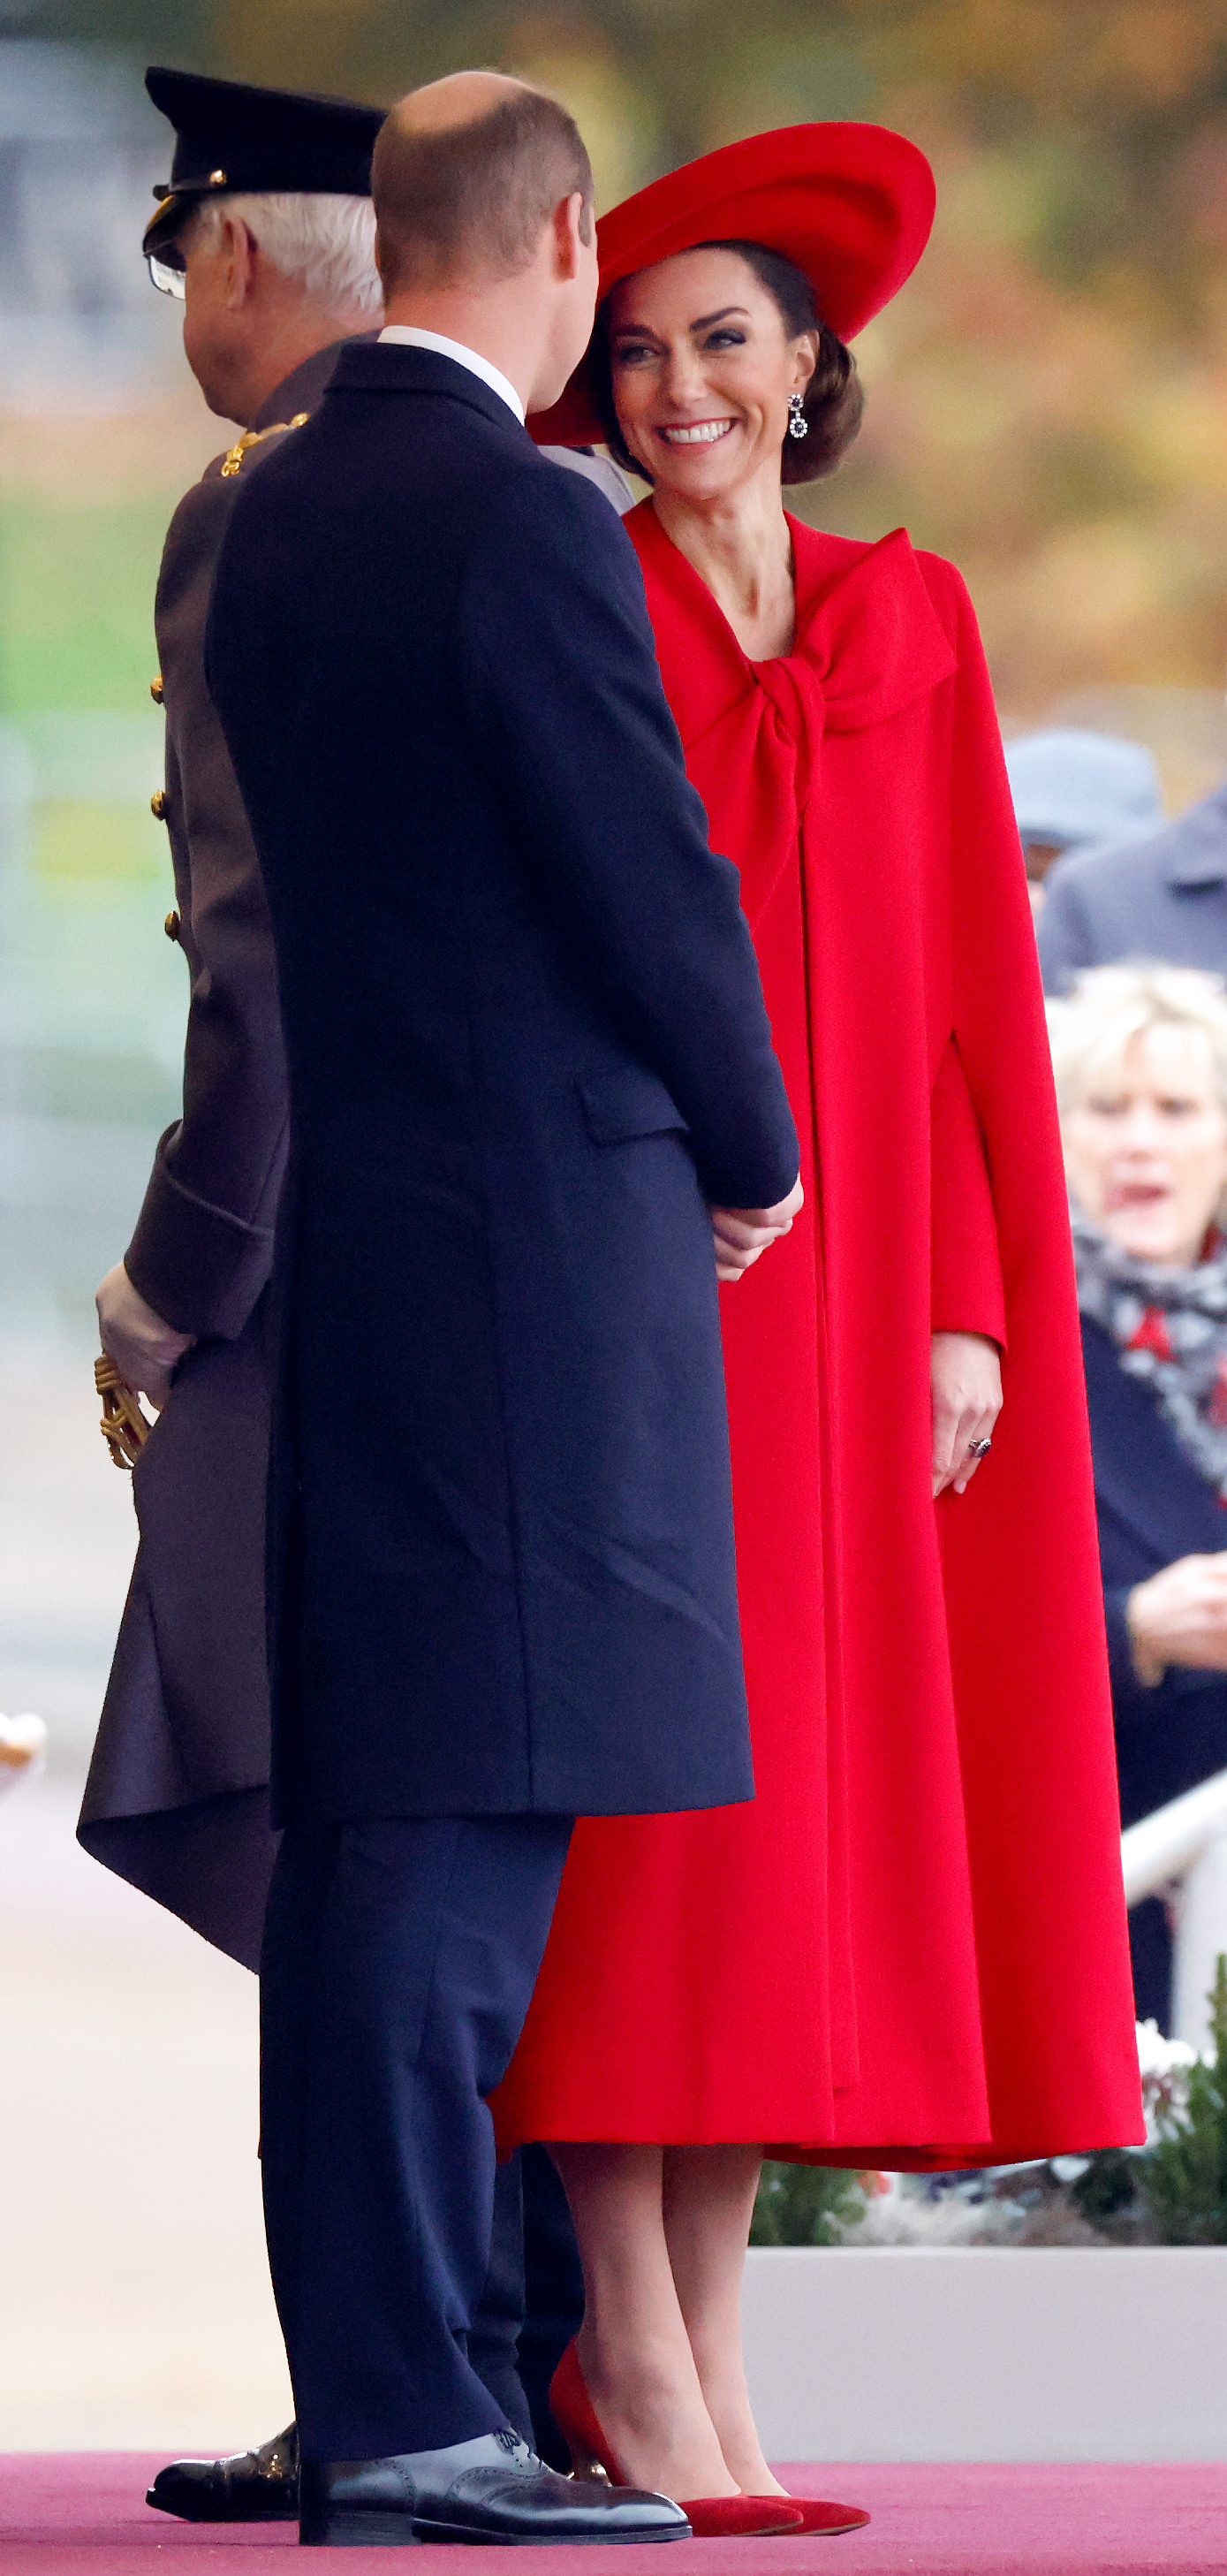 Prince William and Princess Catherine at a ceremonial welcome, at Horse Guards Parade, for the President and the First Lady of the Republic of Korea on day 1 of their state visit on November 21, 2023 in London, England | Source: Getty Images